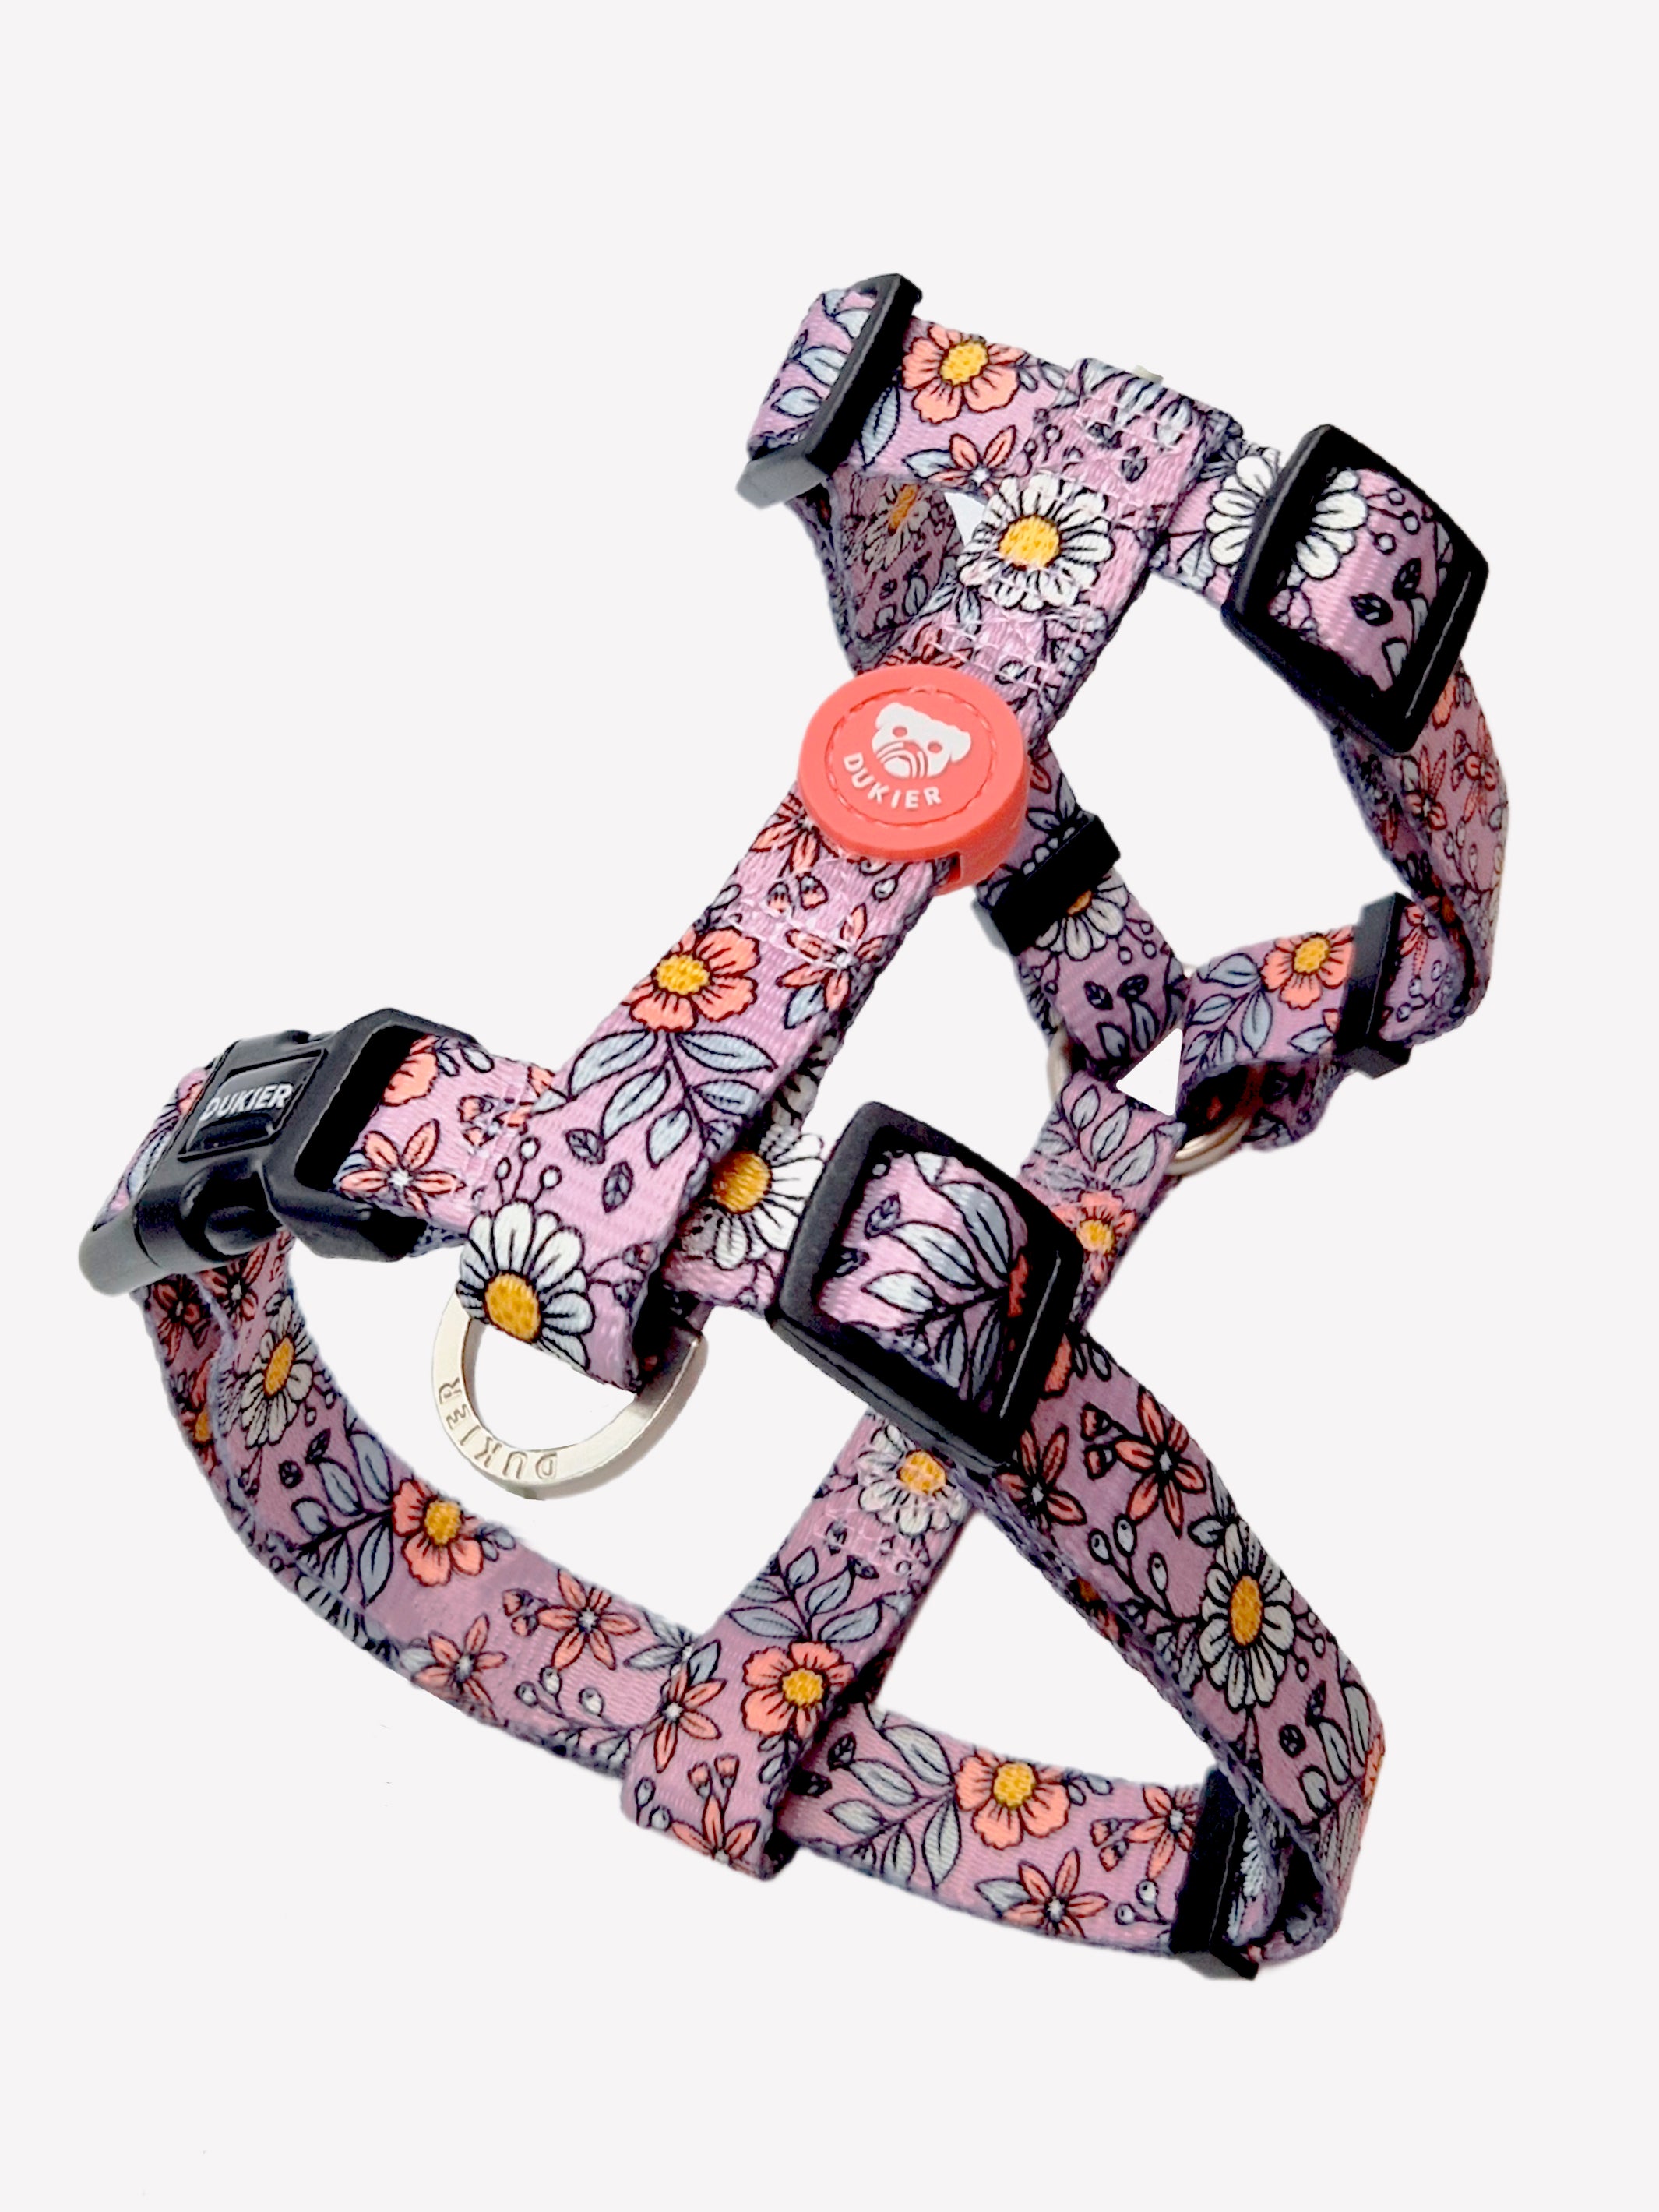 CLASSIC HARNESS FLOWER POWER FOR DOGS